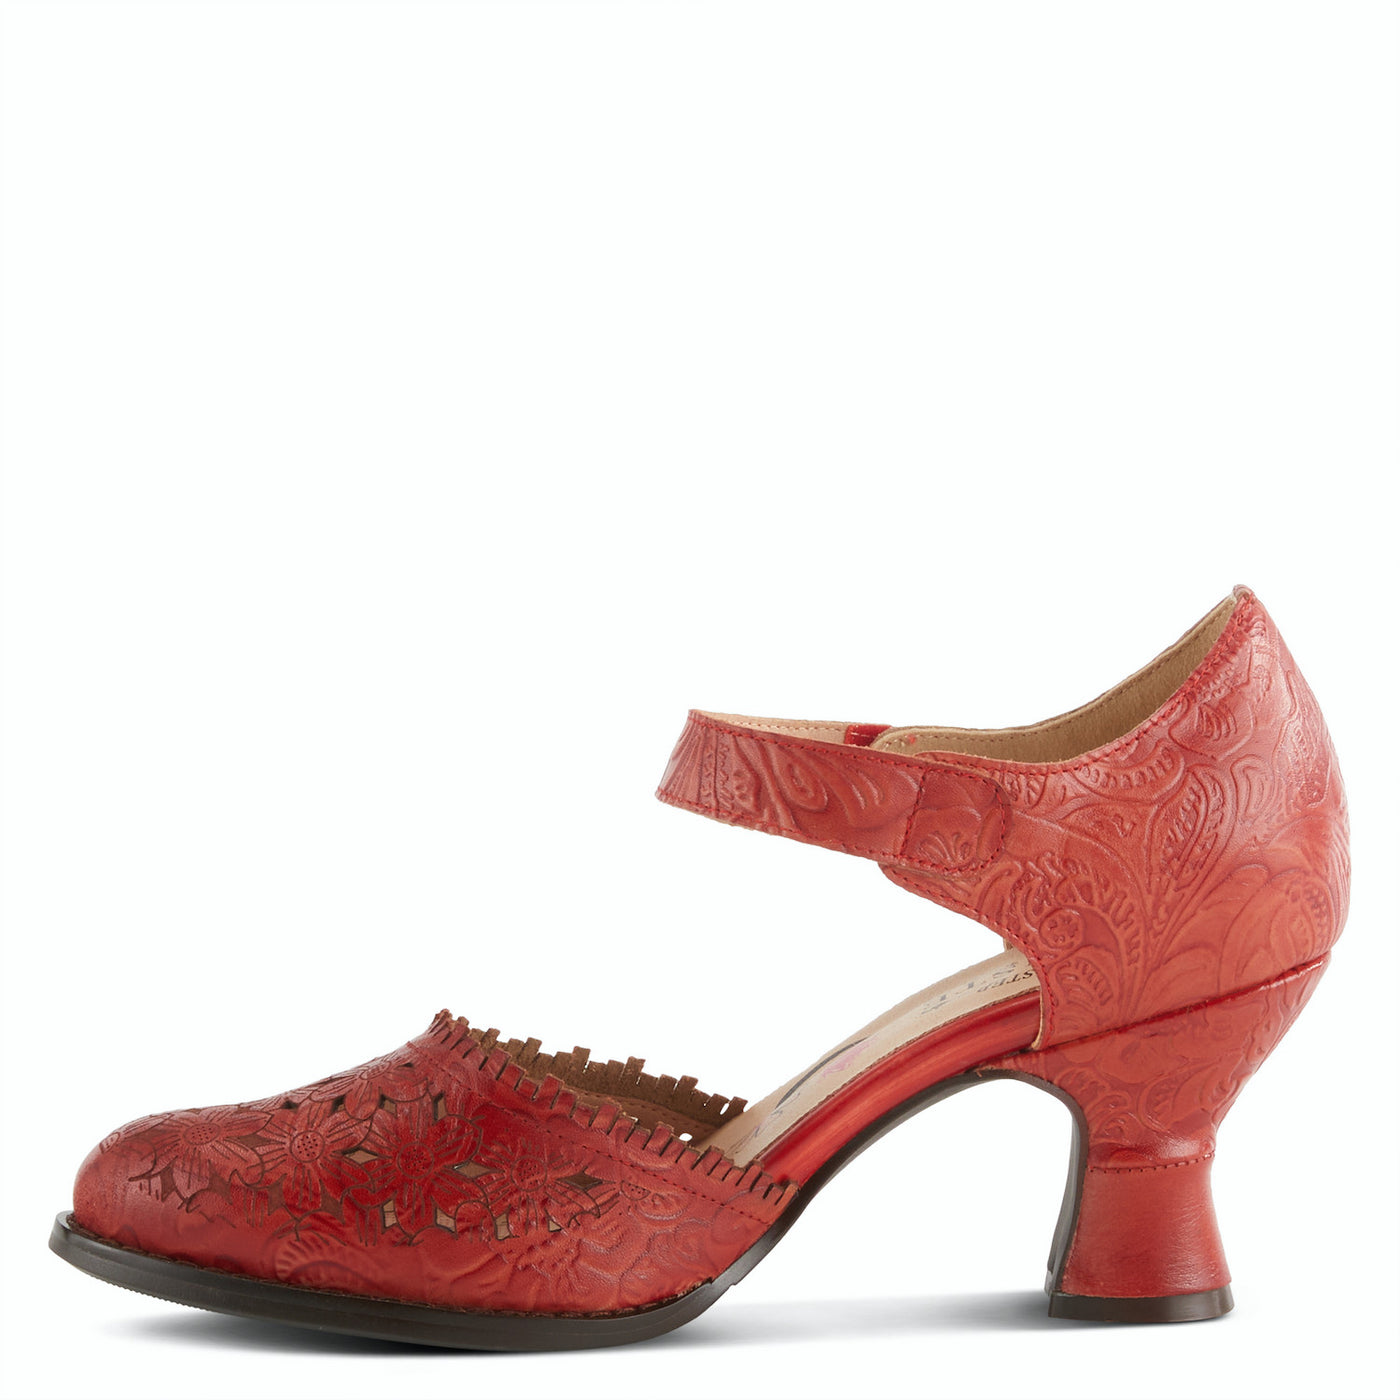 Le 5e Arrondissement Heeled Sandals in Red